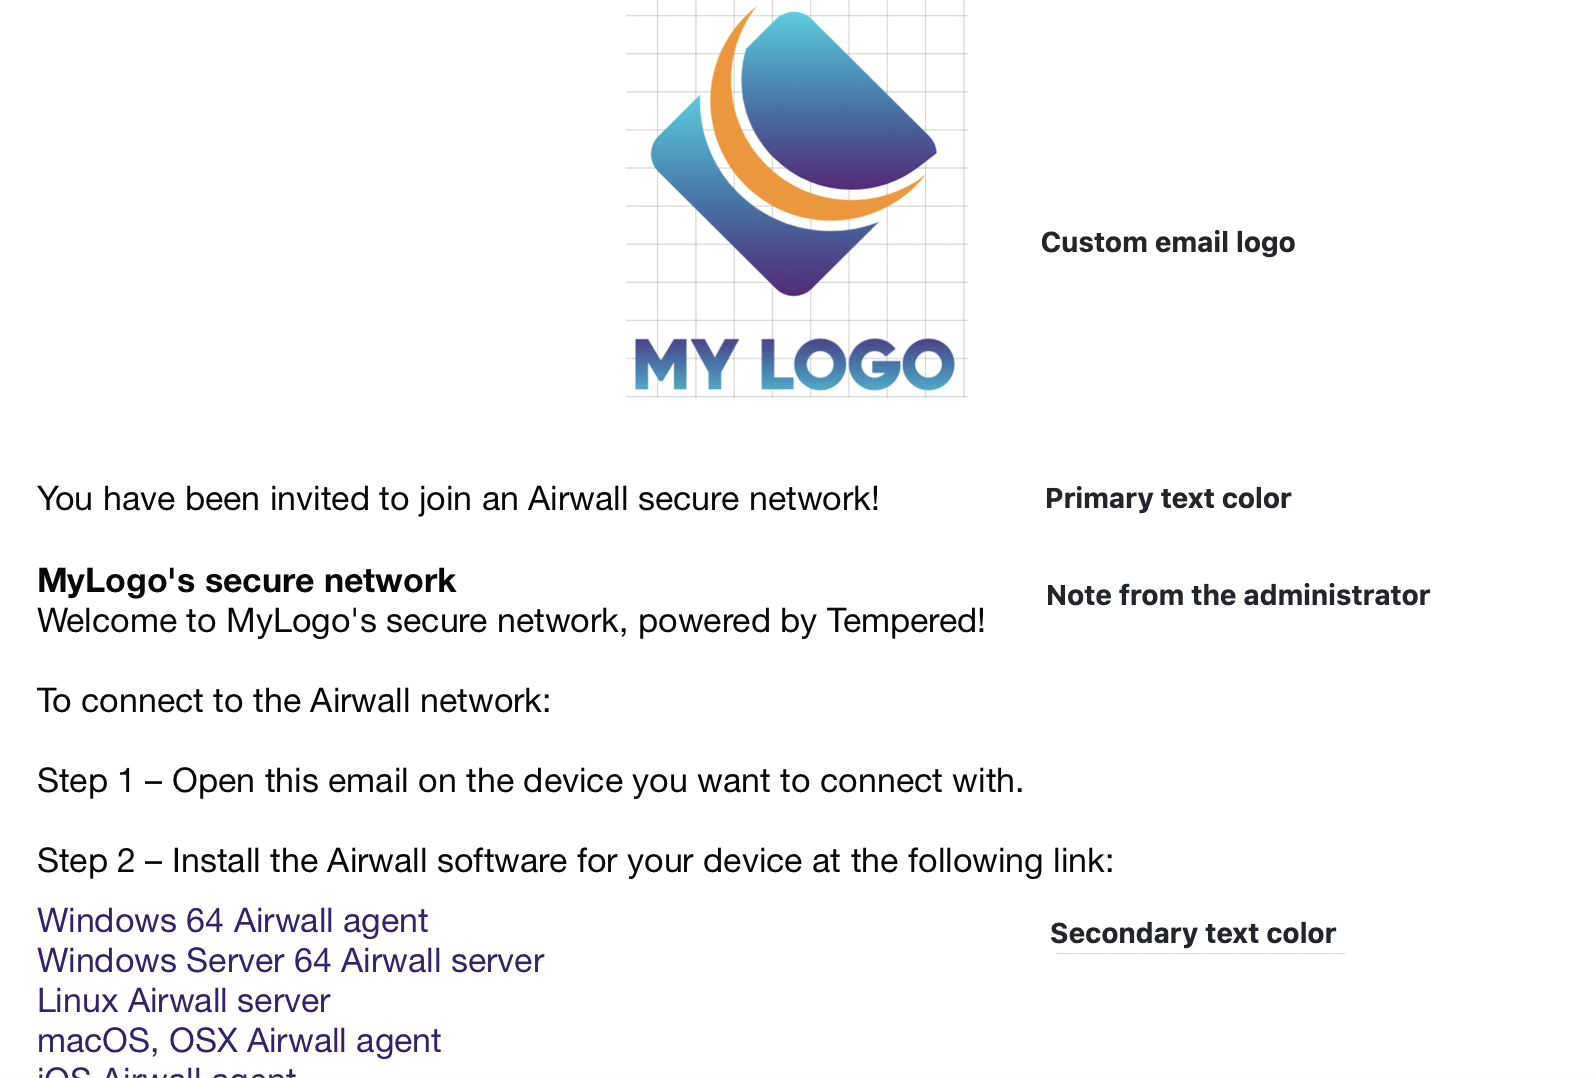 Customized email showing logo, custom text, and custom text colors.